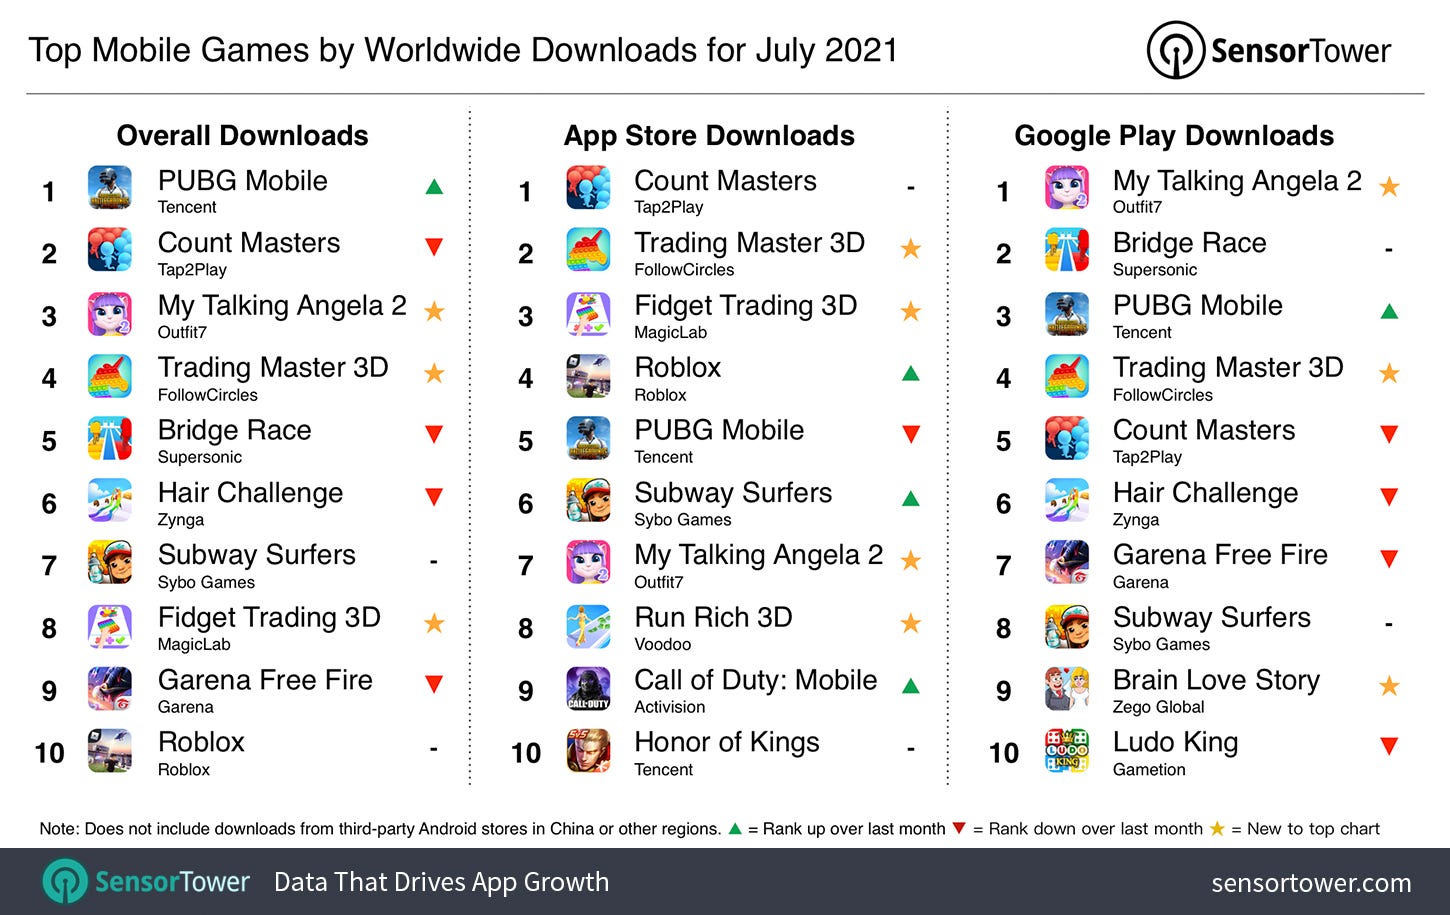 Top Mobile Games Worldwide for July 2021 by Downloads